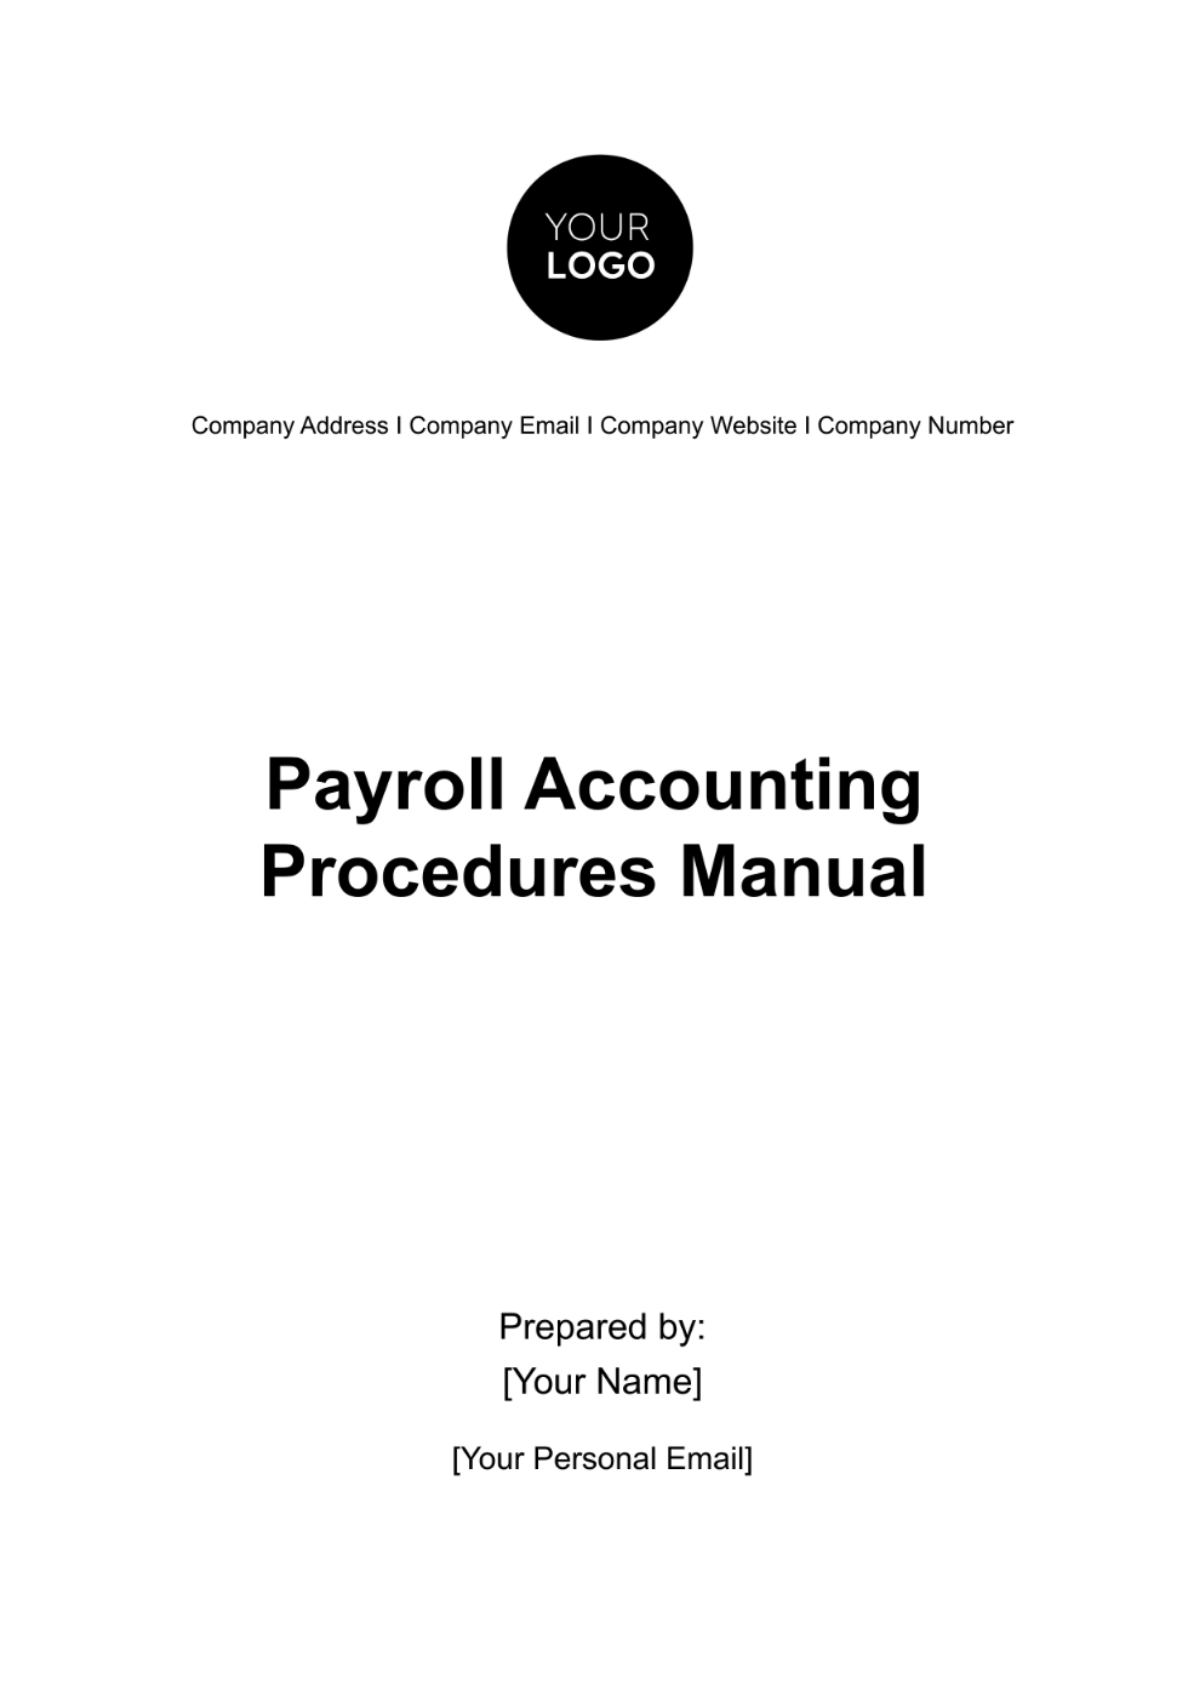 Payroll Accounting Procedures Manual Template